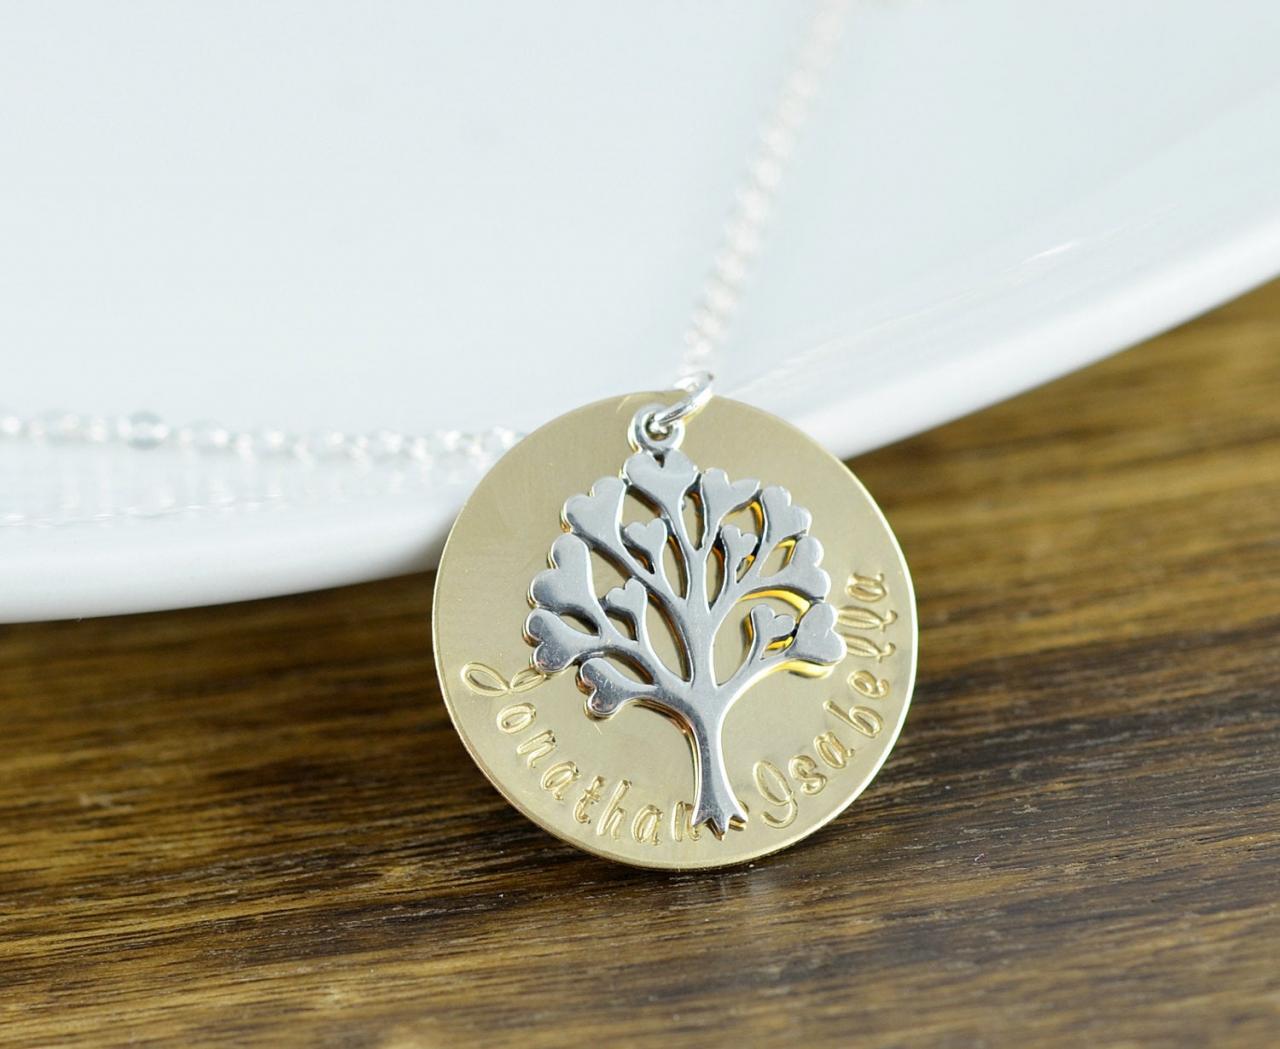 Family Tree Necklace - Mother's Necklace - Tree Of Life Necklace - Personalized Necklace, Kids Name Necklace, Mothers Day Gift, Gift For